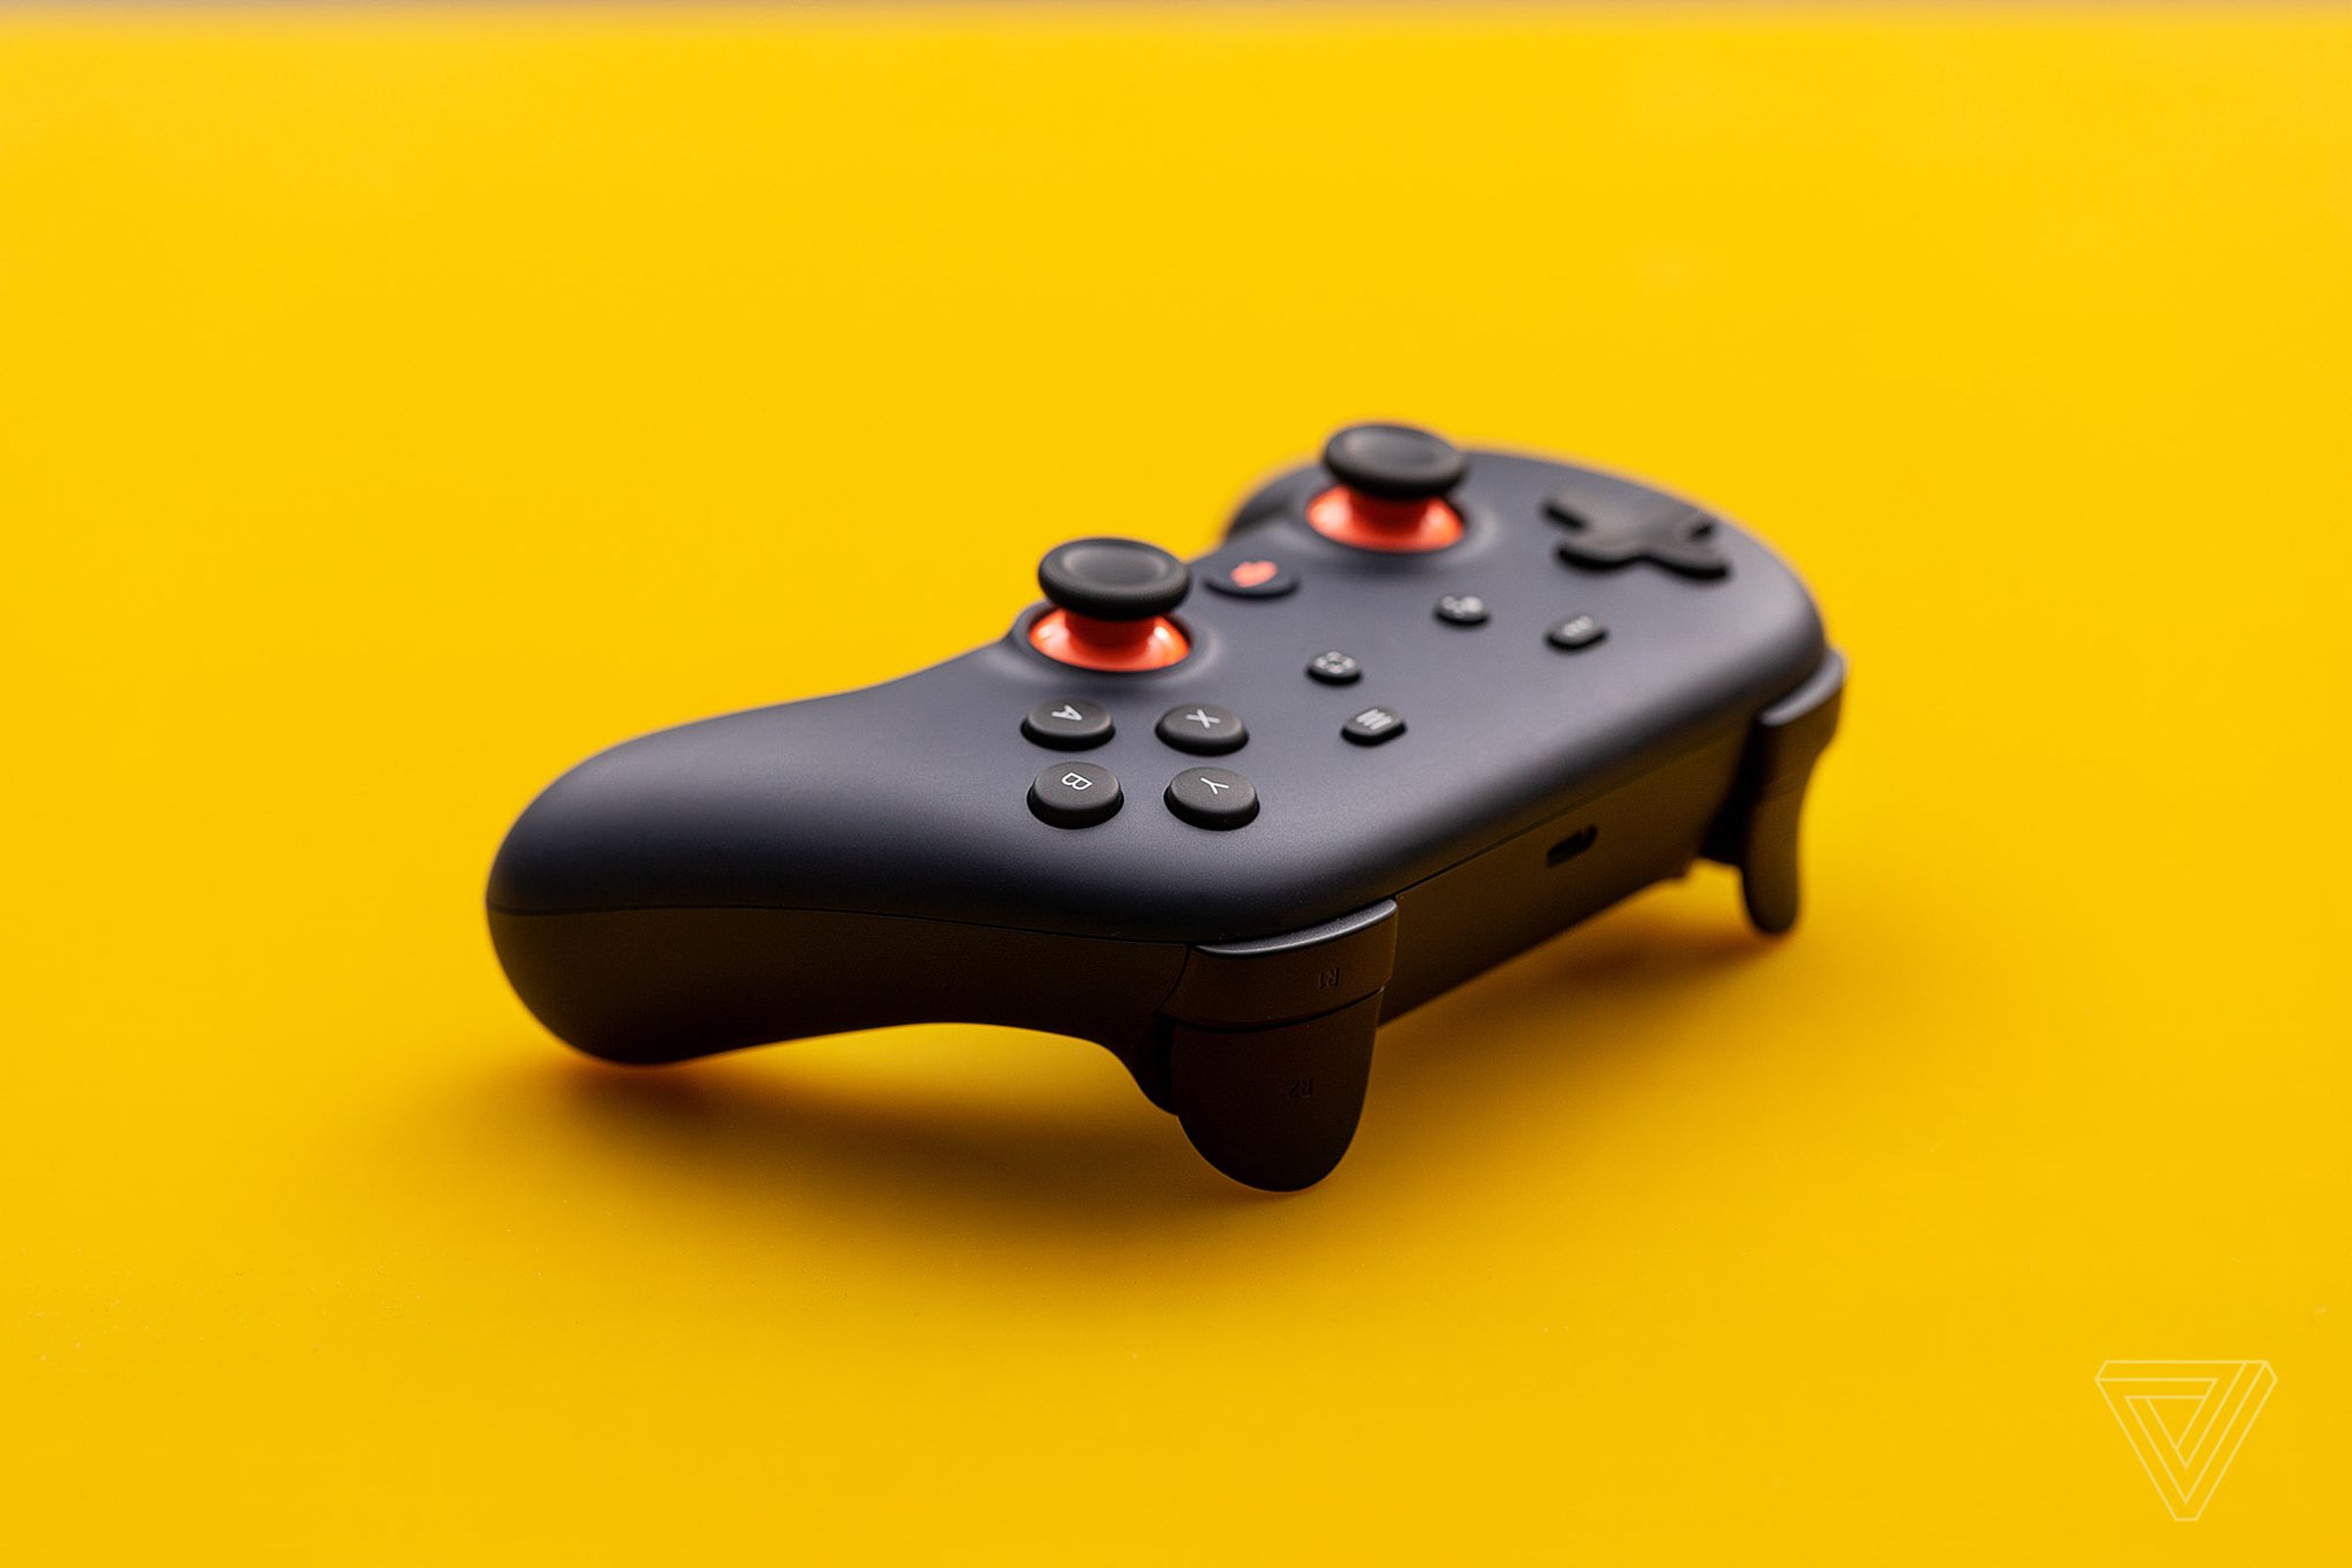 The Stadia controller. You might want to keep yours from being bricked, BTW.